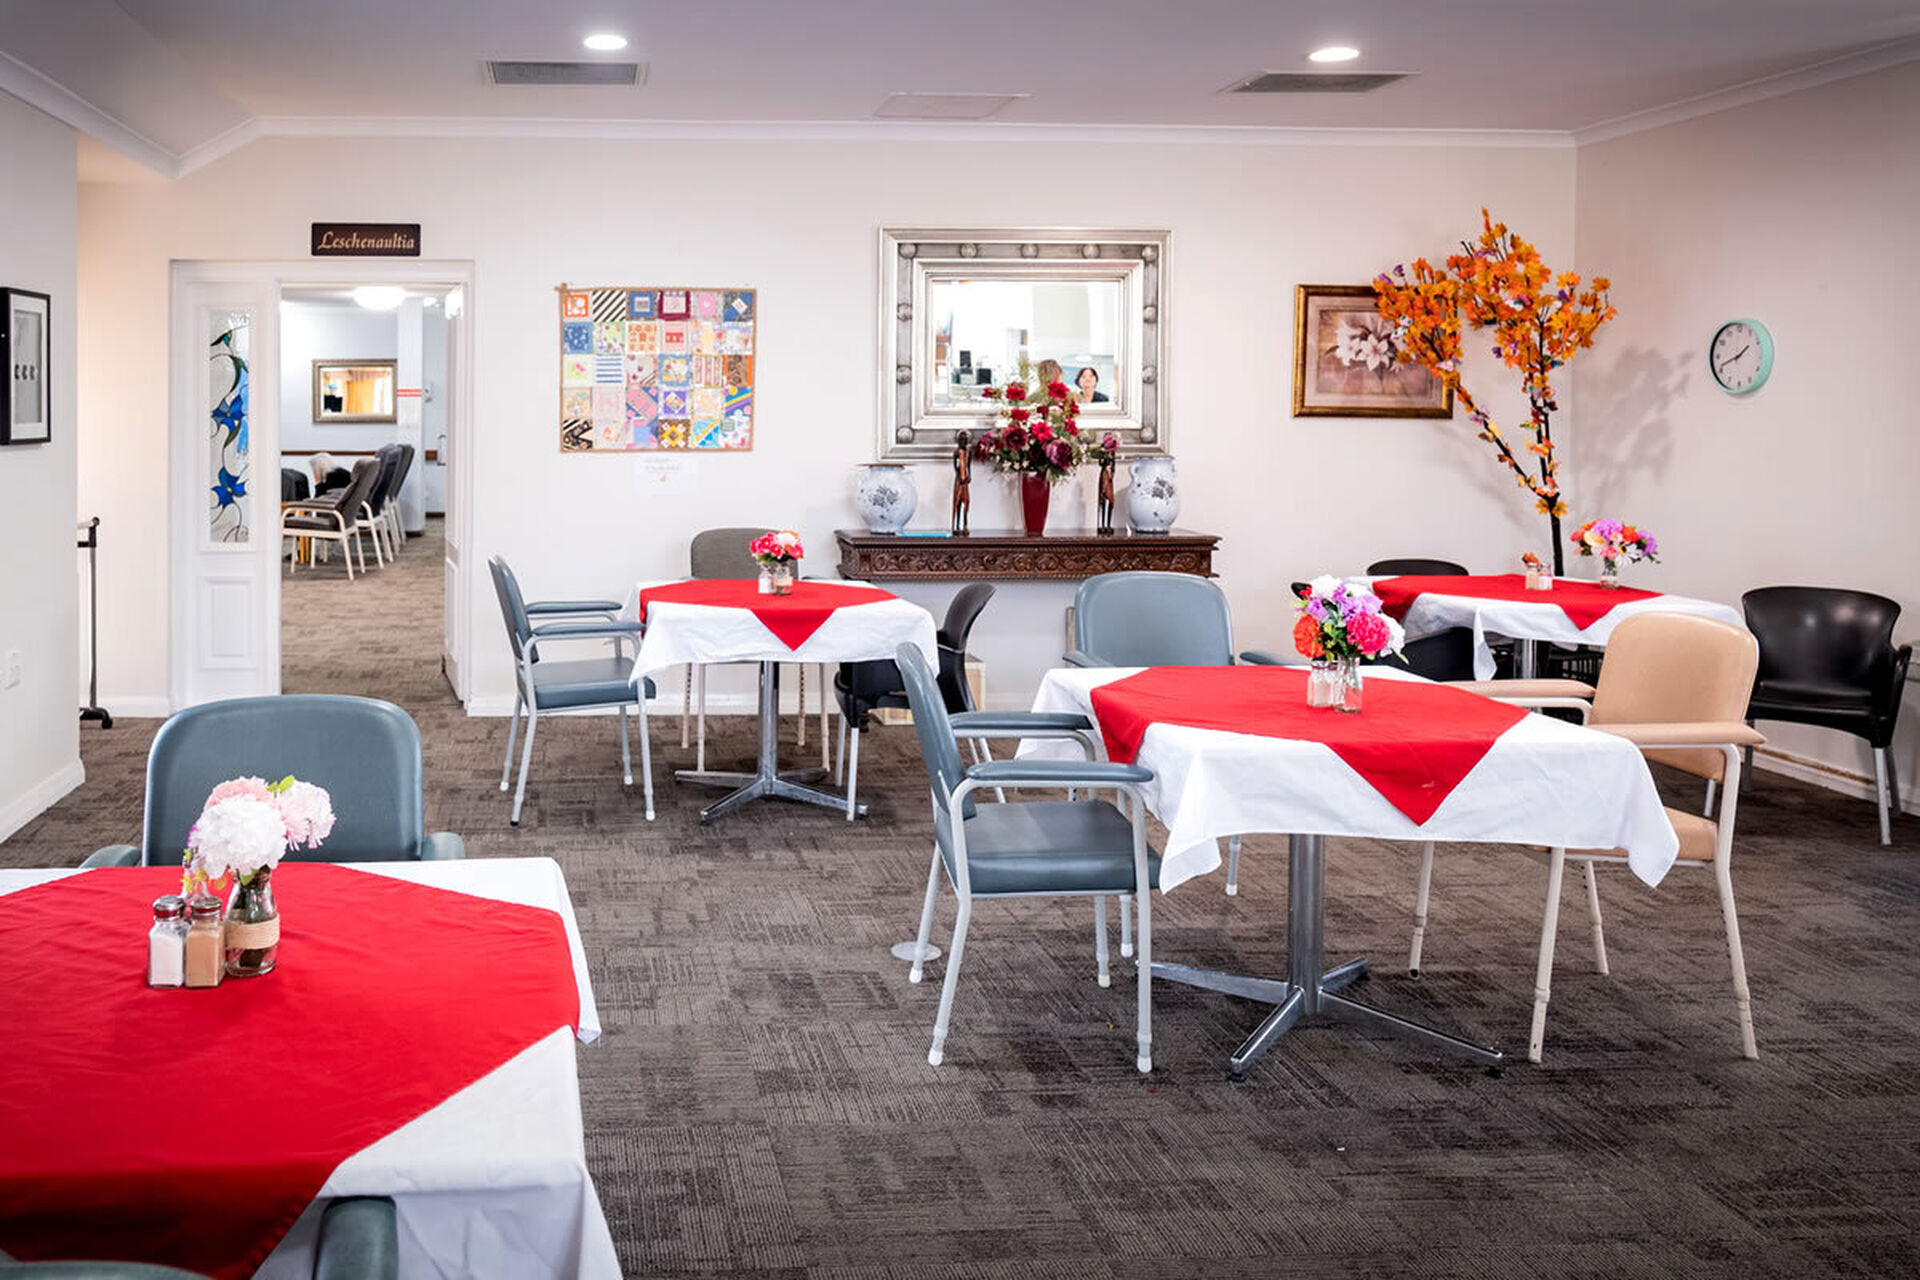 modern communal dining room for nursing home residents to be served fresh meals at baptistcare morrison gardens aged care home in midland wa